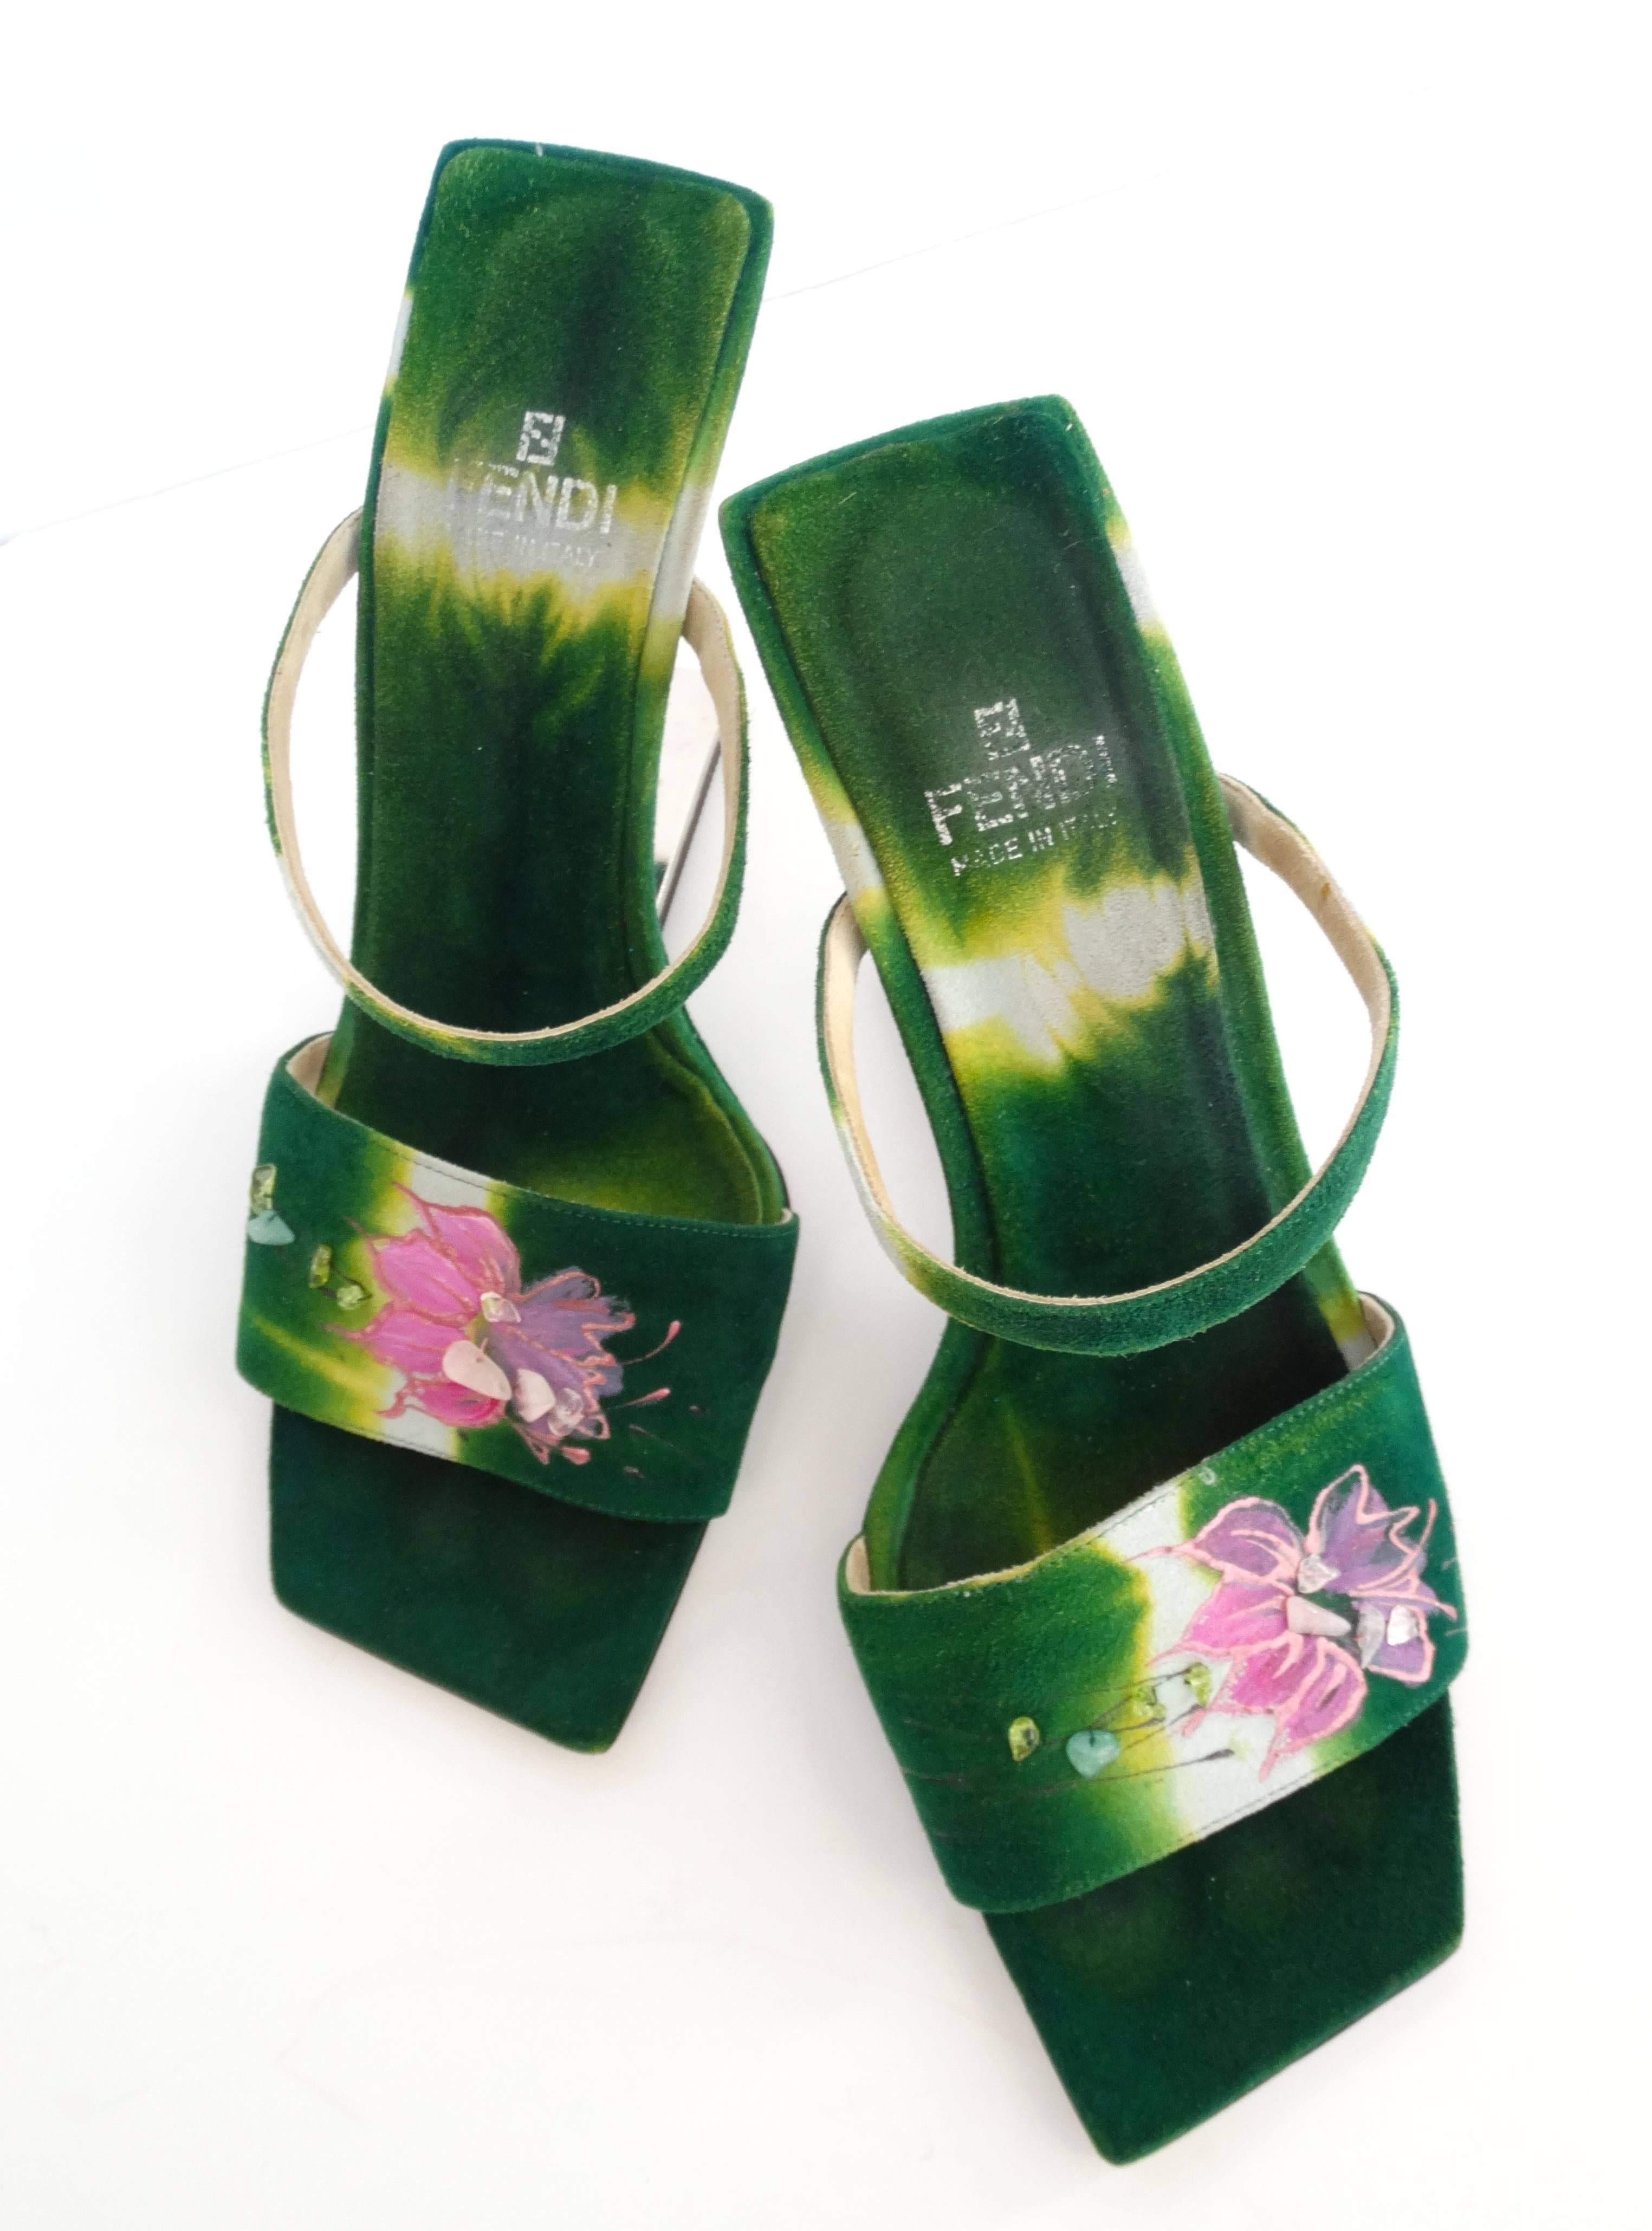 Out of this world Fendi heels! Ombre green suede leather with hand-painted flowers across the top of the sandal. Amazing anti-gravity silver heels. Marked a size 38.5. 

Heel Height 3.5 in 
Insole Length: 9.5 in 